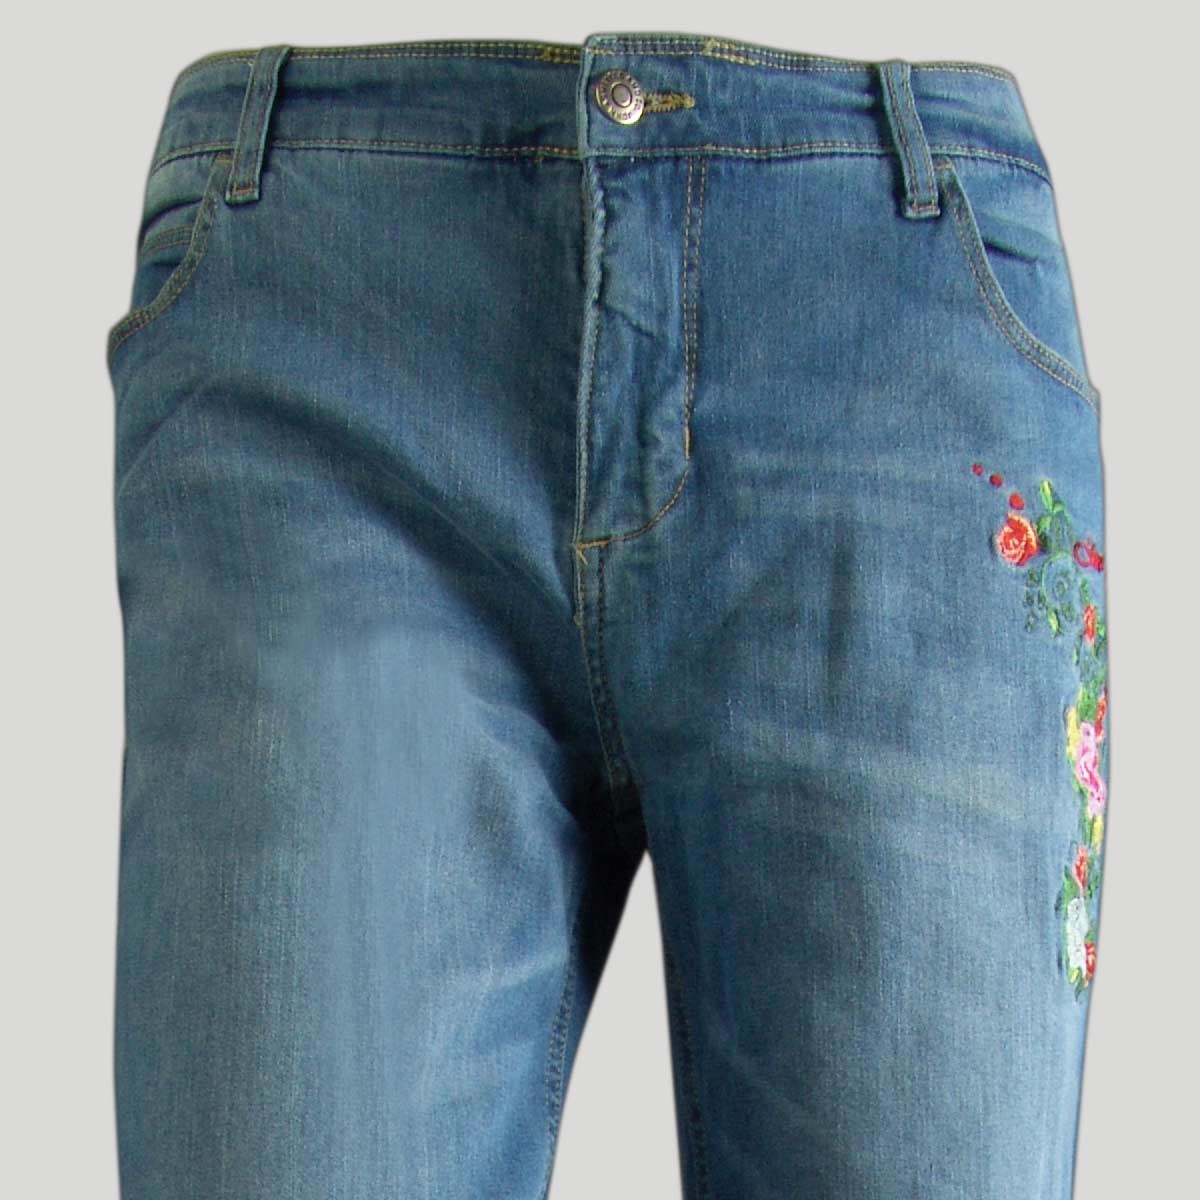 Embroidery Skinny Jeans for Woman